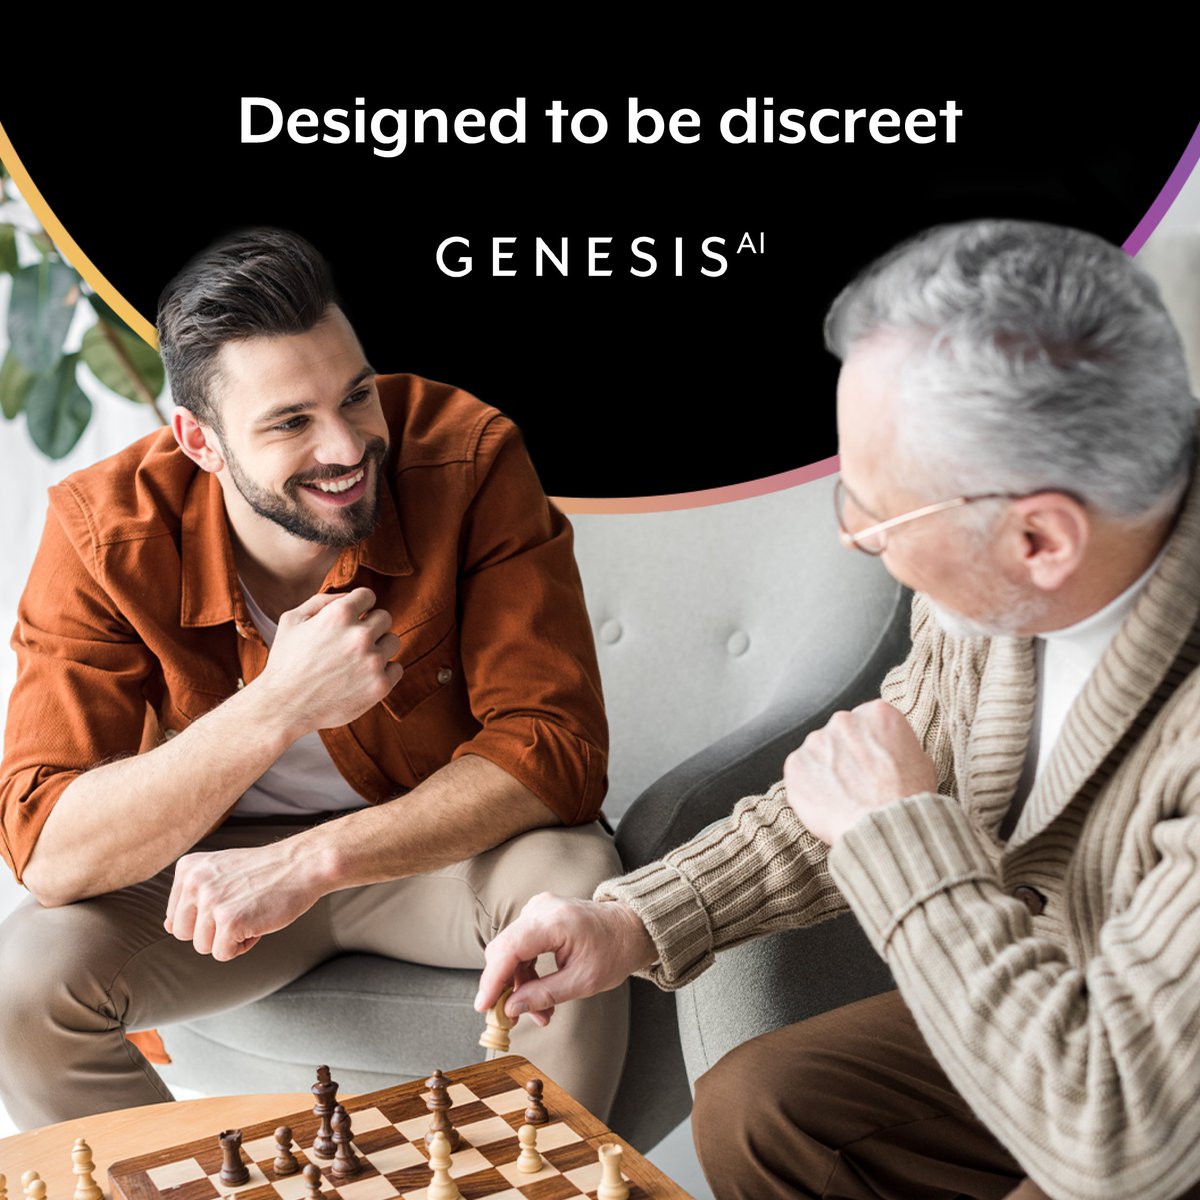 Experience comfort and discretion with Genesis AI hearing aids.
The new geometric design rests snug and conforms naturally behind the ear, making it barely noticeable to others.

#StarkeyMENA #HearingAidsSpecialist #HearingAids #HearingLoss #HearingLossAwareness